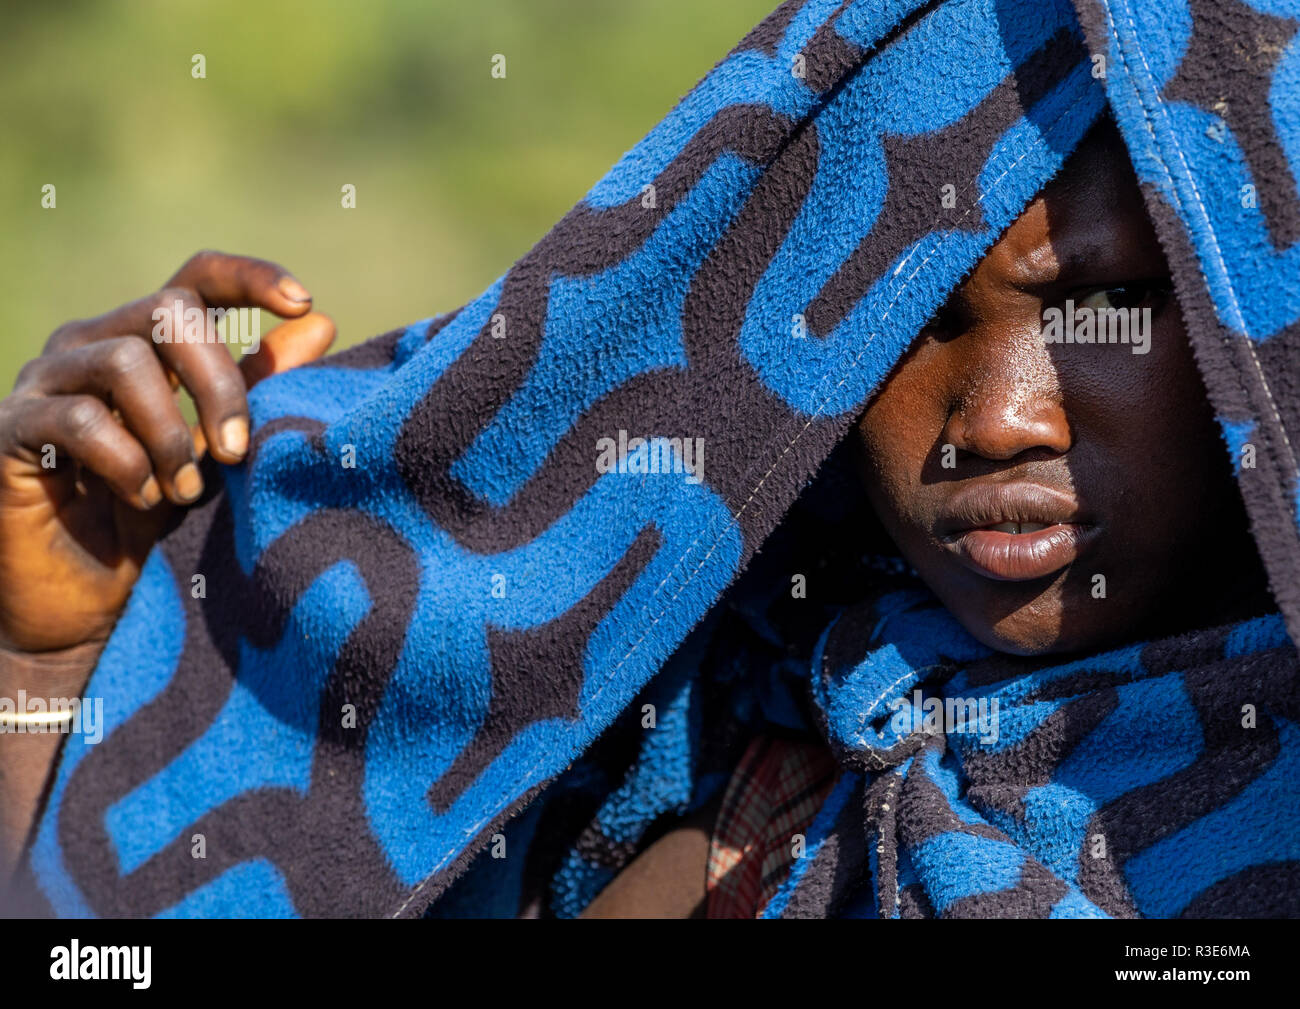 Suri tribe girl protecting her head from the sun with her blanket, Omo valley, Kibish, Ethiopia Stock Photo